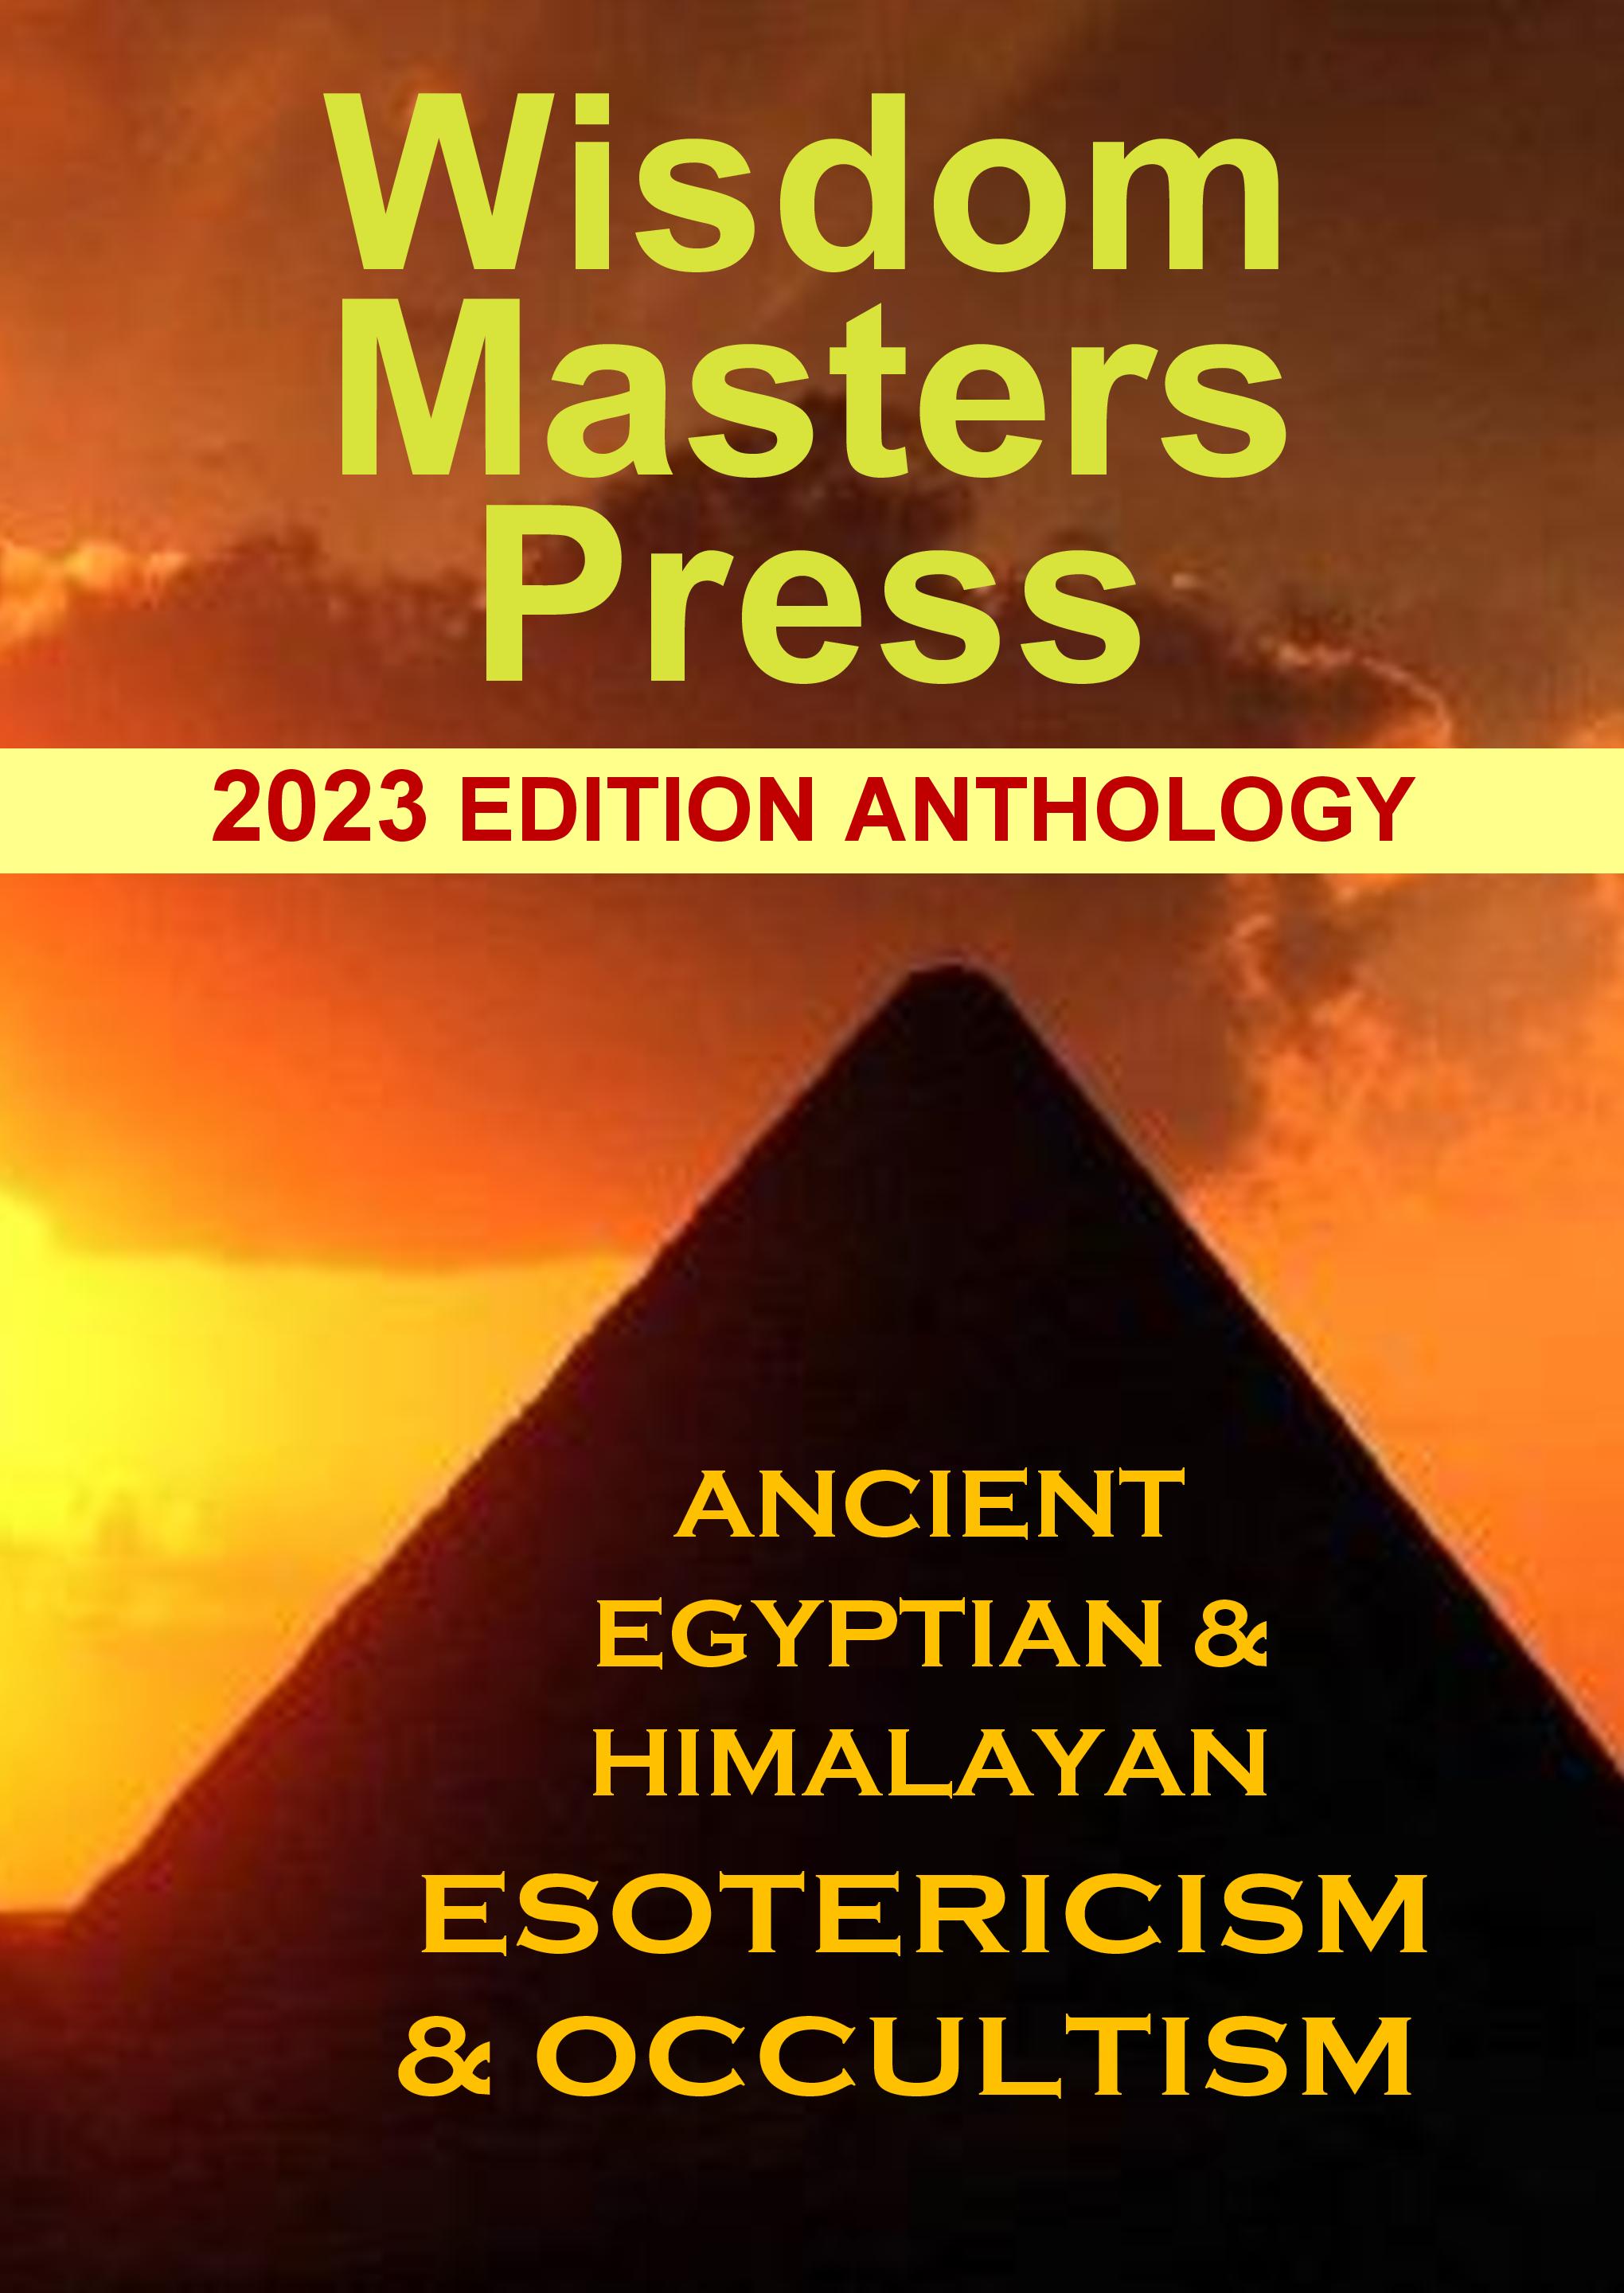 Wisdom Masters Press Anthology book cover